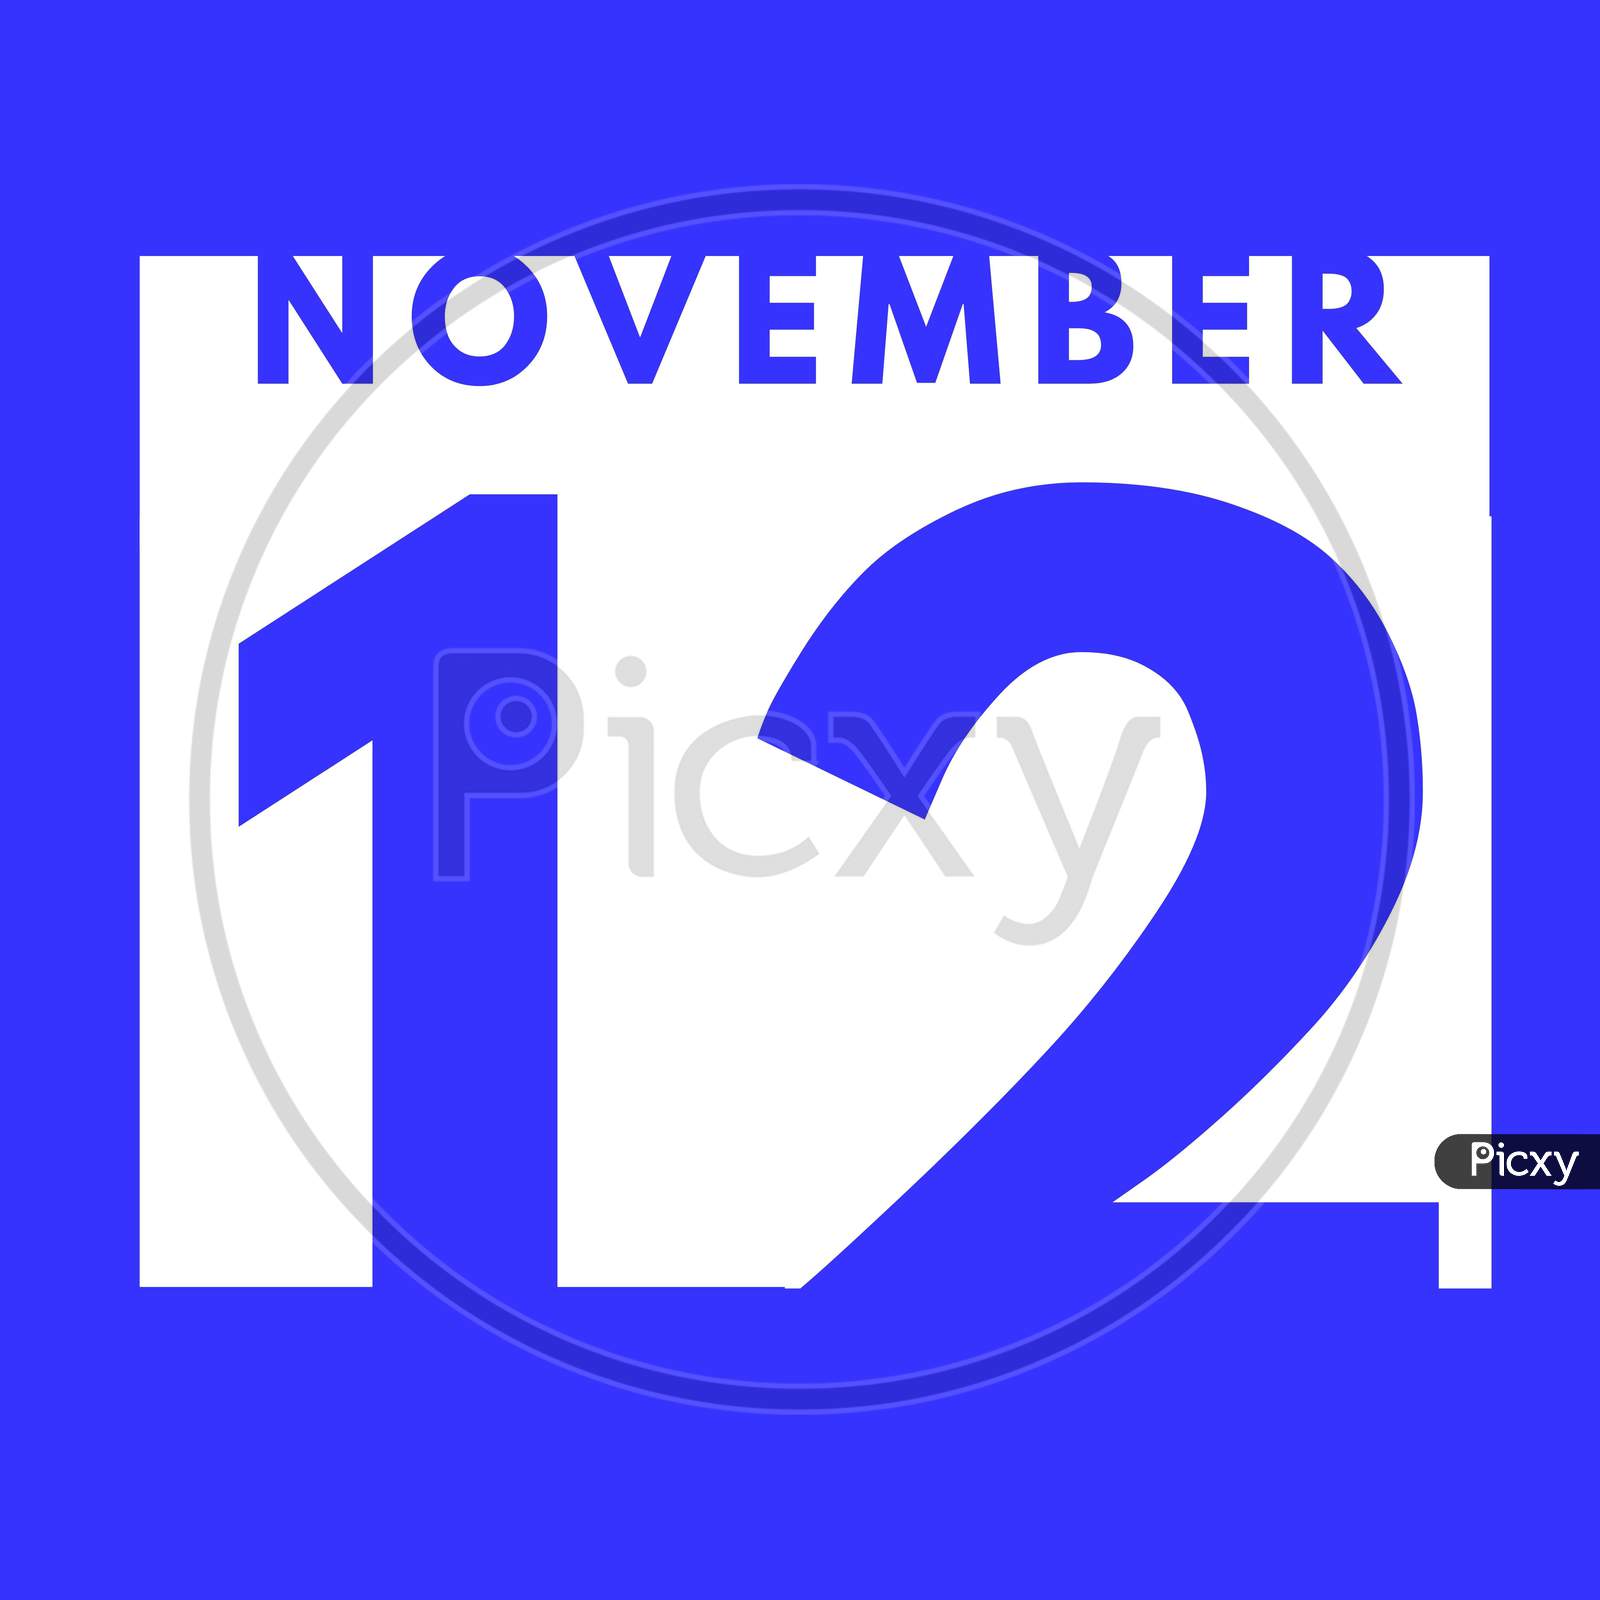 November 12 . Flat Modern Daily Calendar Icon .Date ,Day, Month .Calendar For The Month Of November